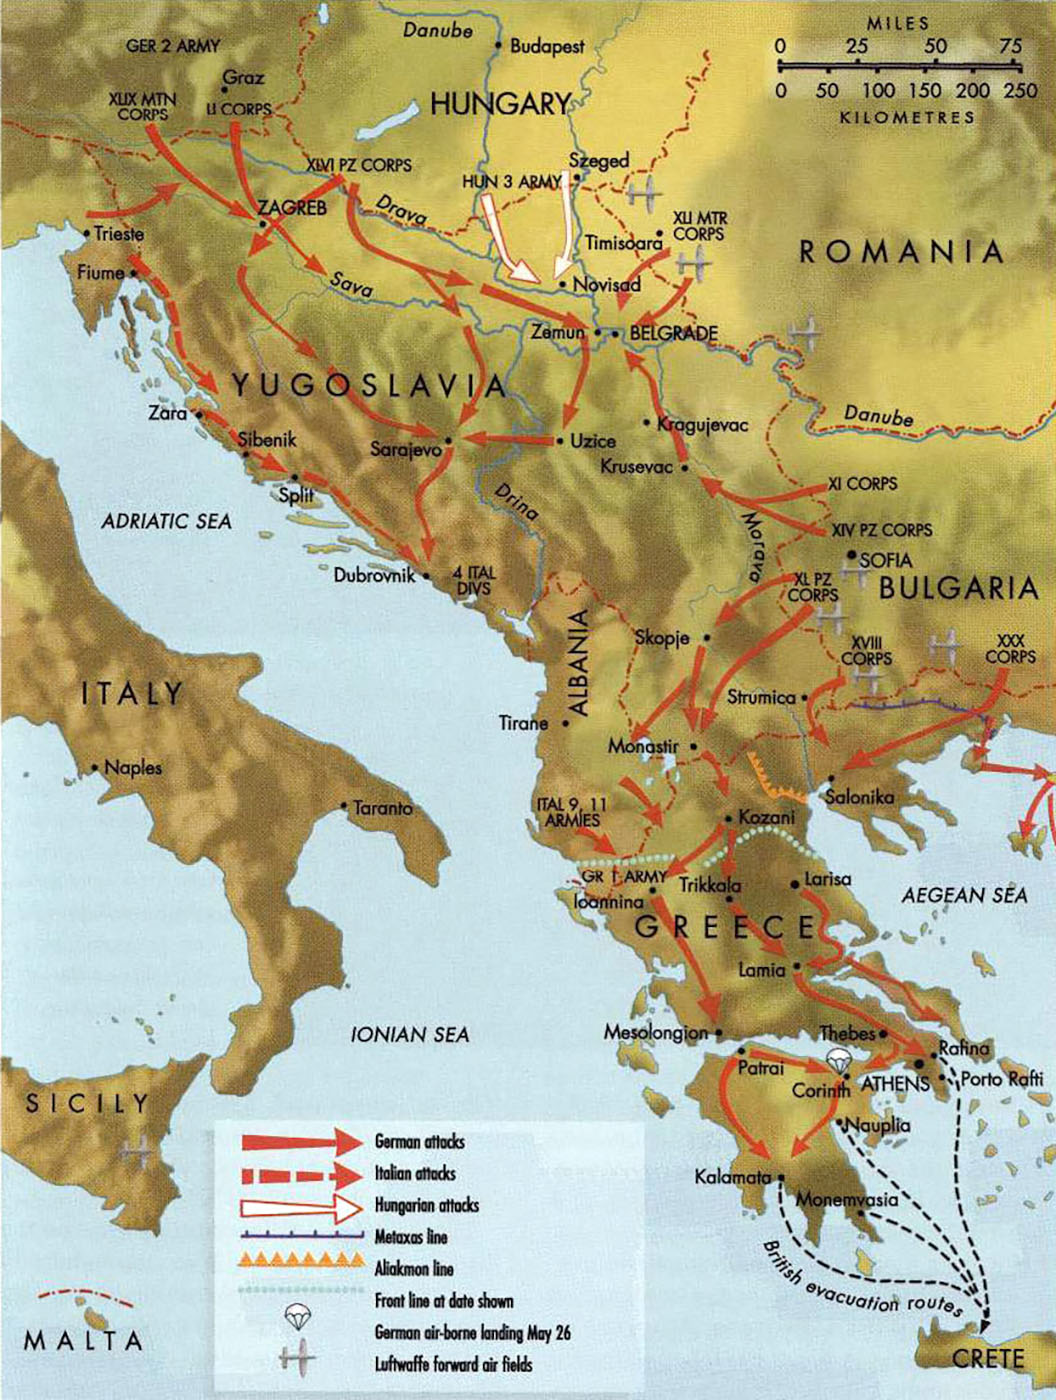 Artwork showing a map of the Balkans Campaign 1941 0A